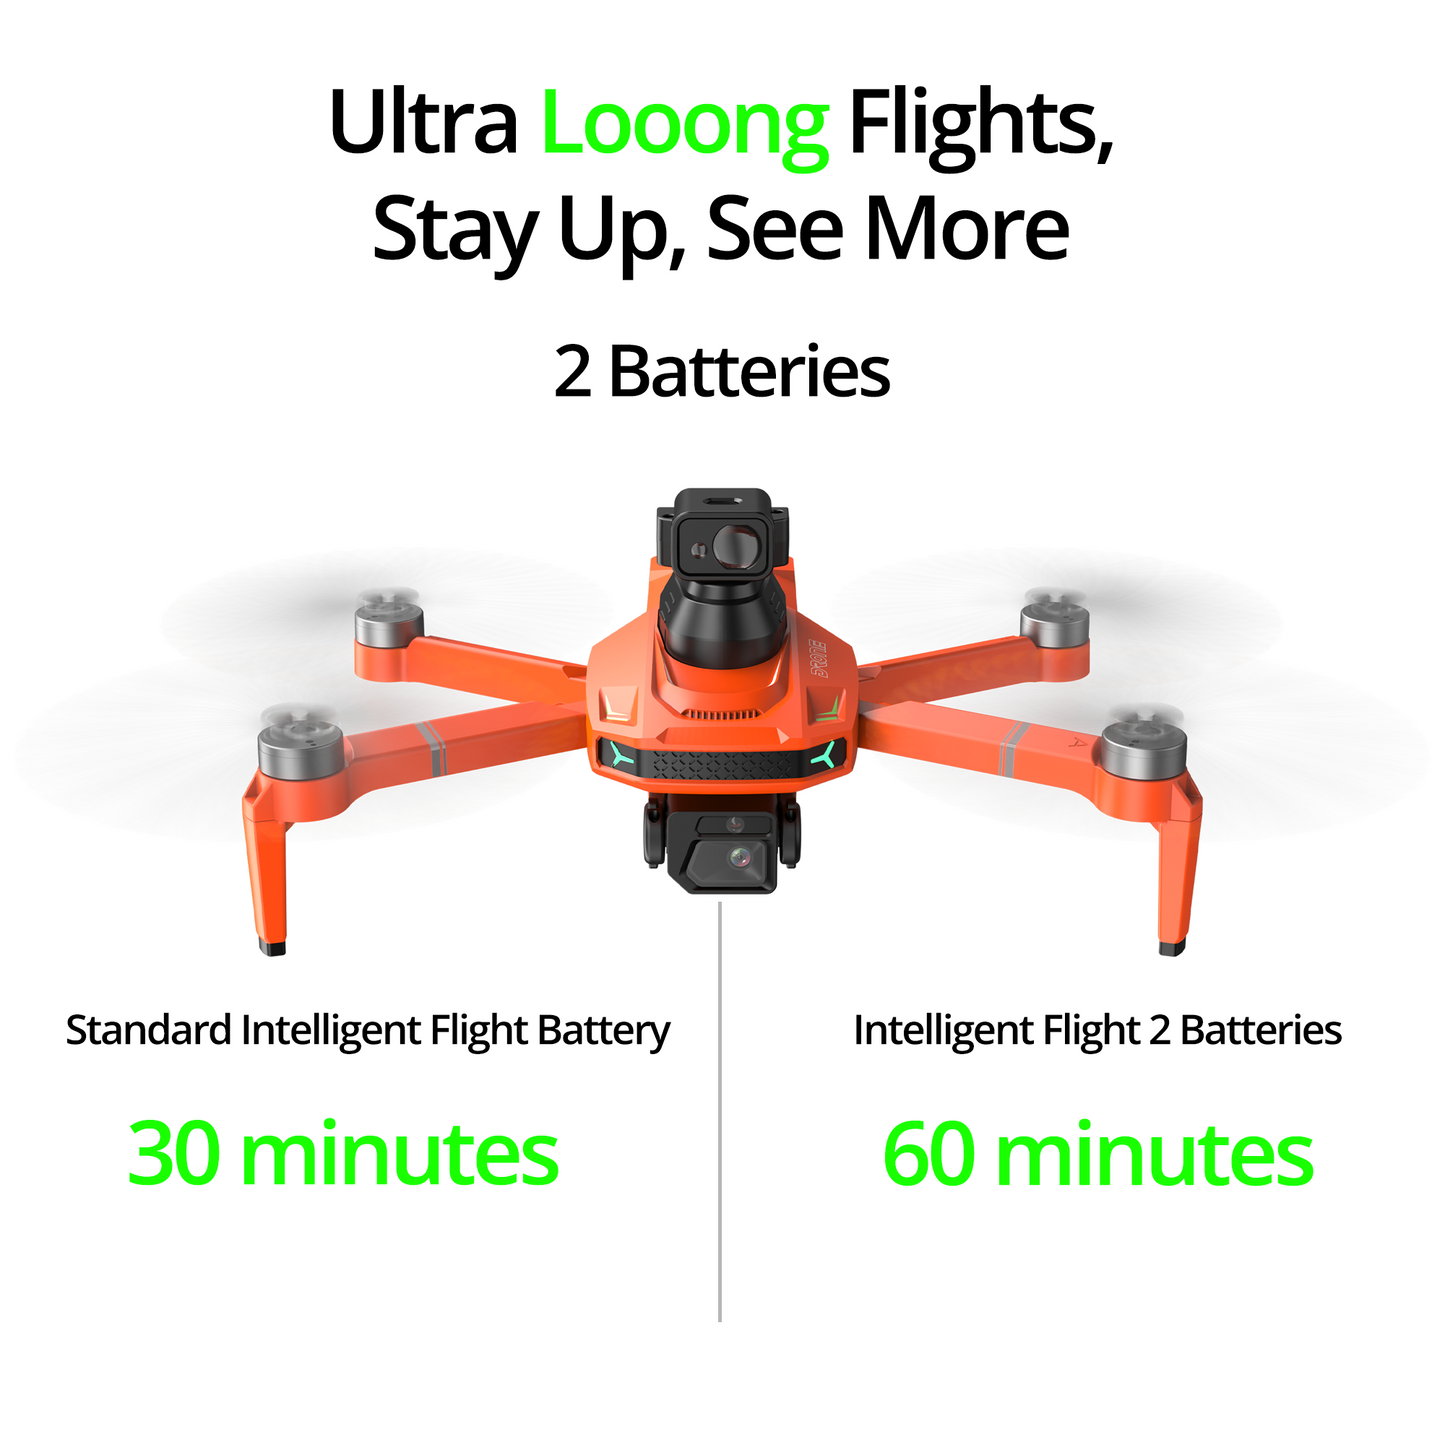 REFURBISHED: The Bigly Brothers E59 Mark III Delta Orange Superior Edition, 30-Min Flight Time, Obstacle Avoidance Drone with Camera, 720 Degrees of Obstacle Avoidance Drone with Carrying Case Below 249g